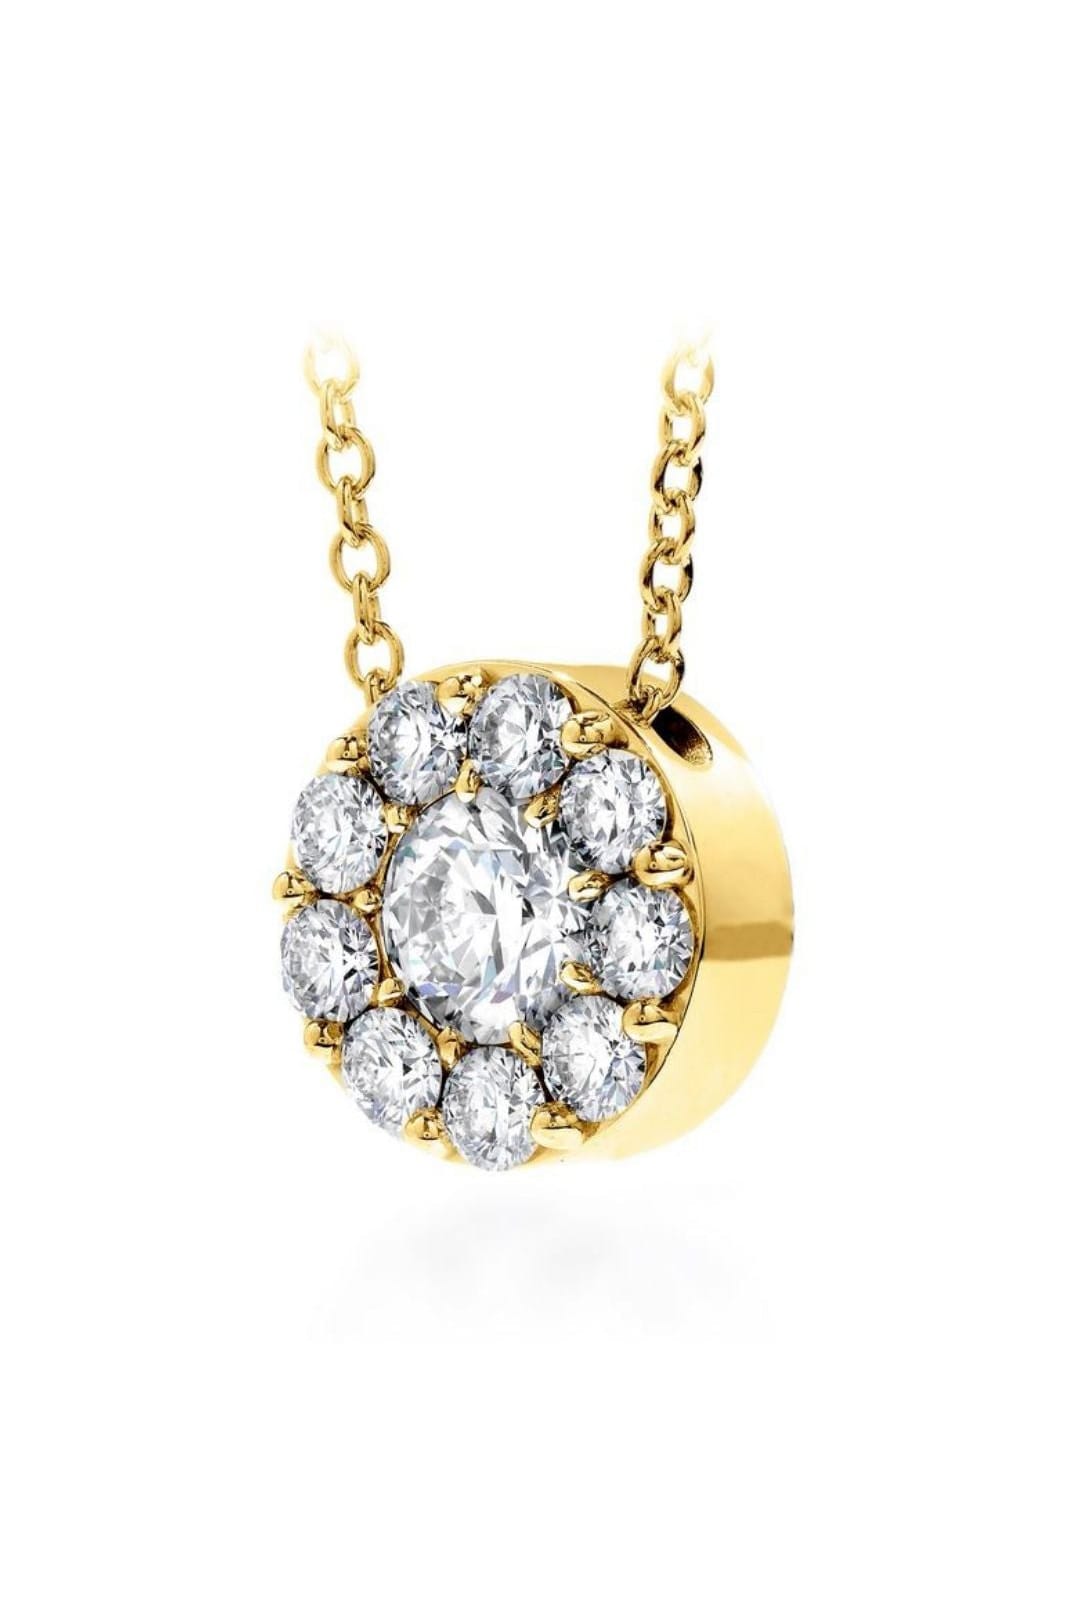 Fulfillment Pendant Necklace From Hearts On Fire available at LeGassick Diamonds and Jewellery Gold Coast, Australia.